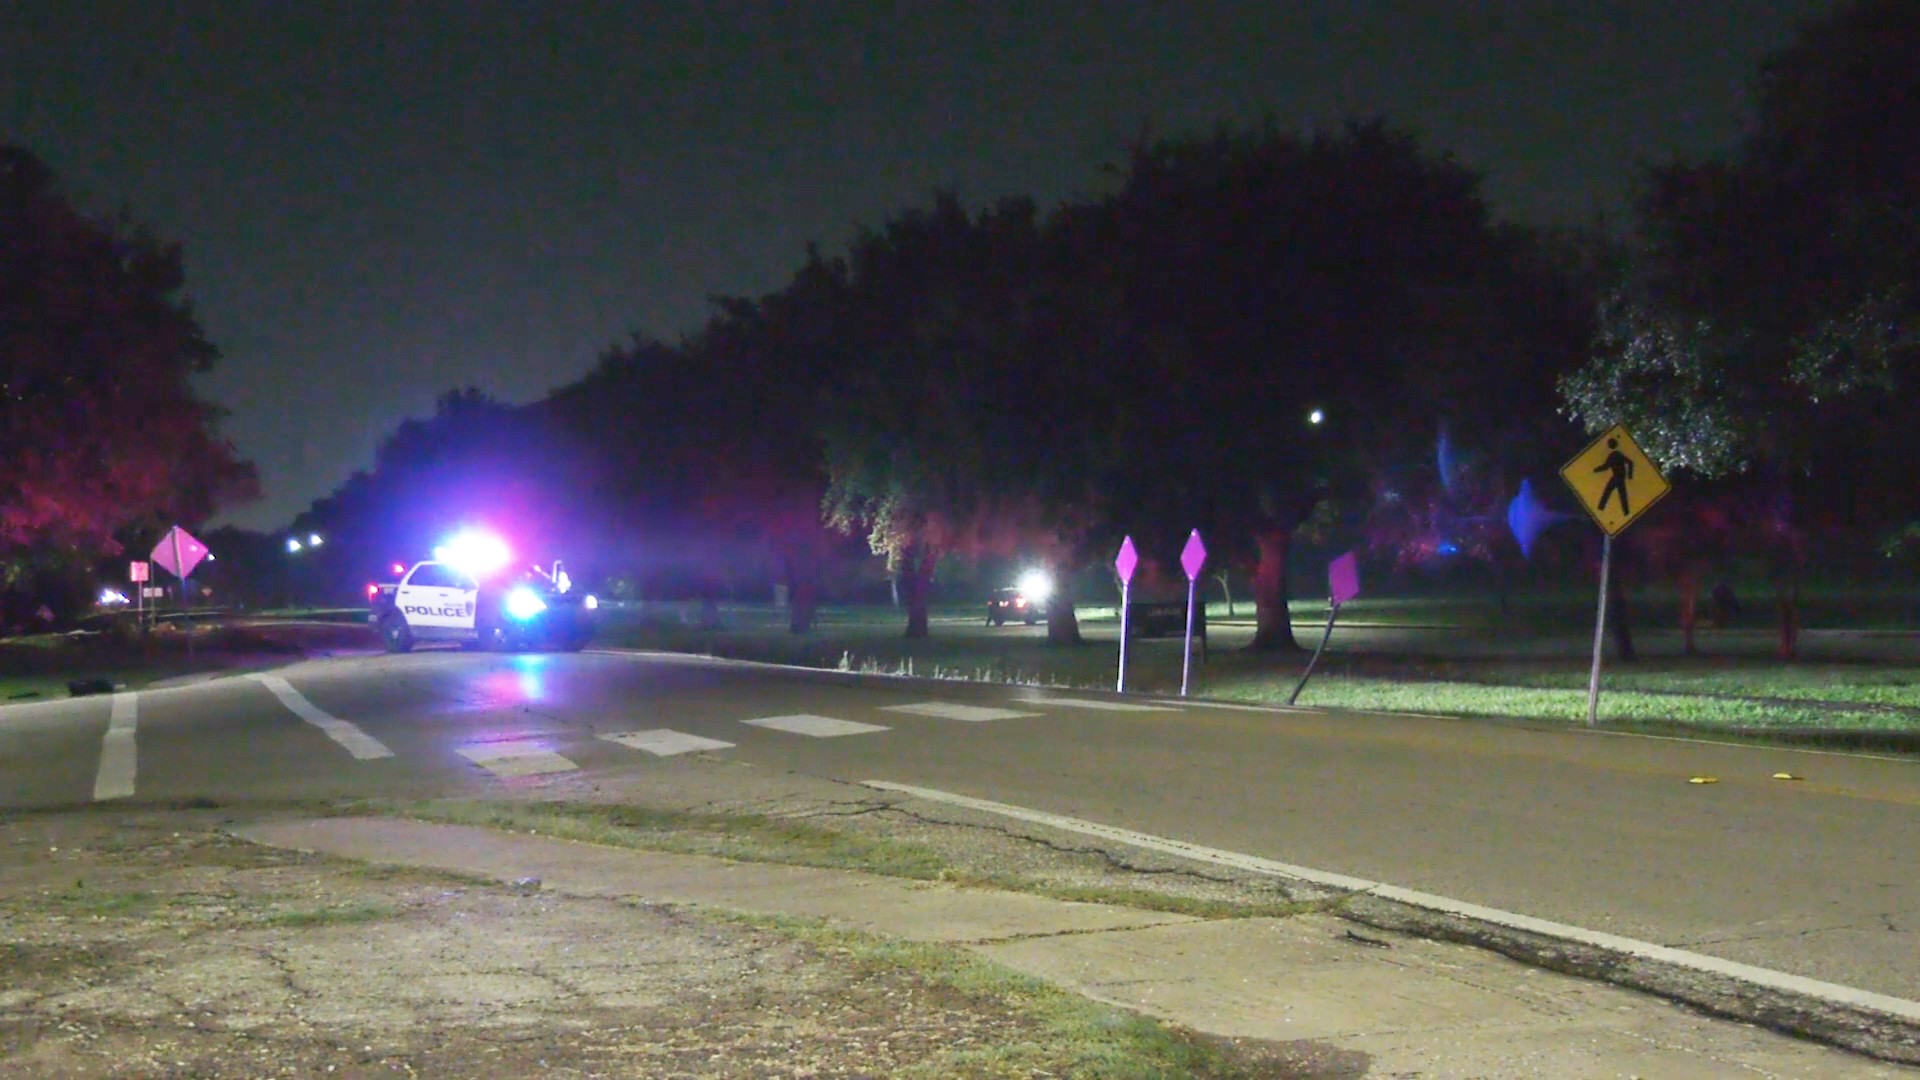 Gunfire was reported outside a SE Houston police station shortly before 1 a.m. Sunday, the police department said.